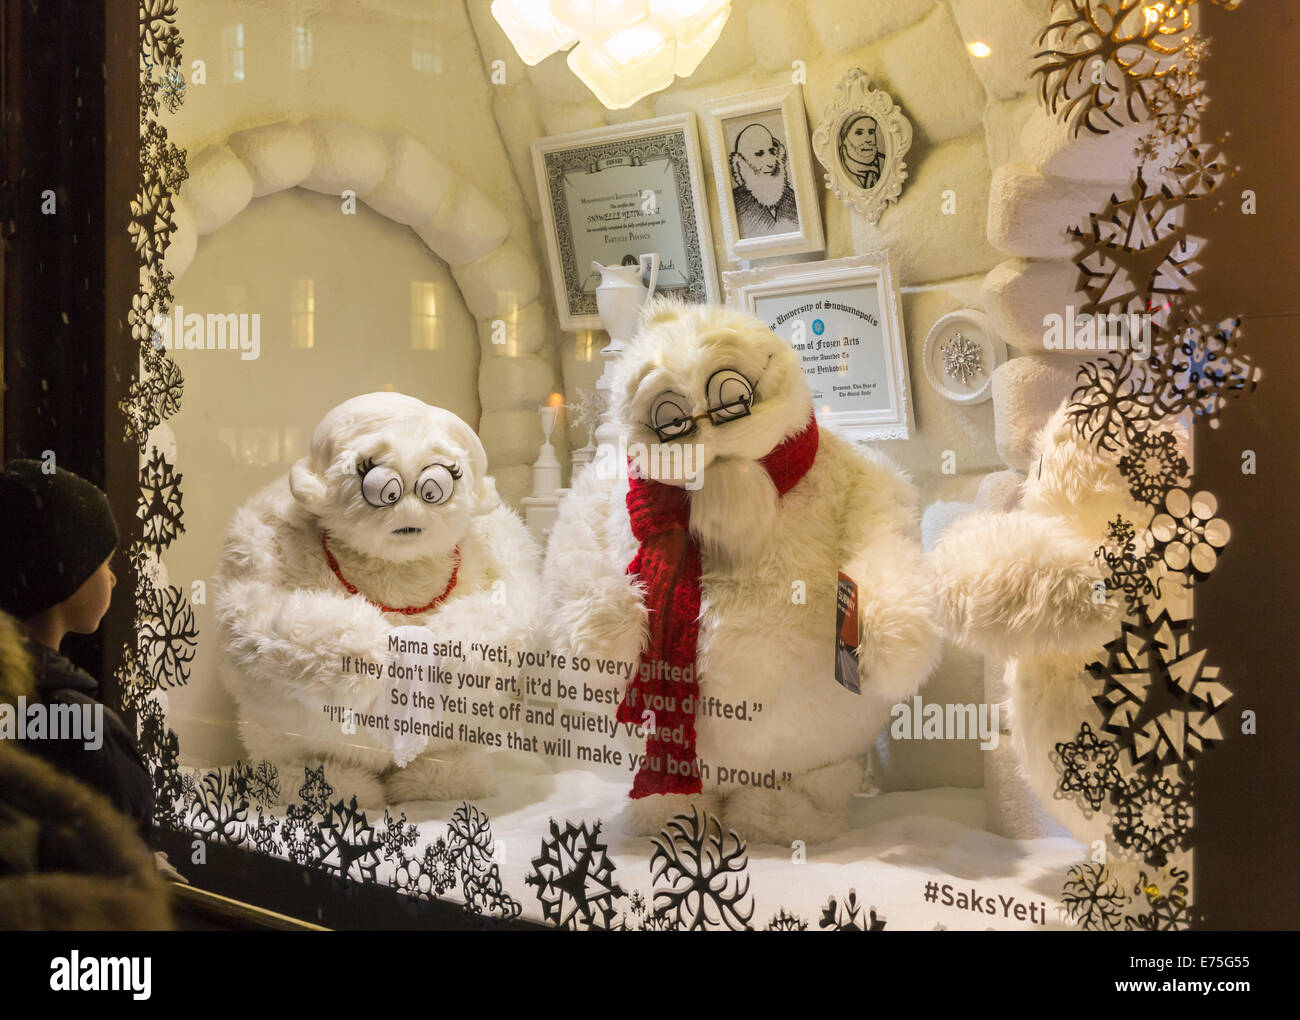 Best Holiday Window Displays on 5th Ave